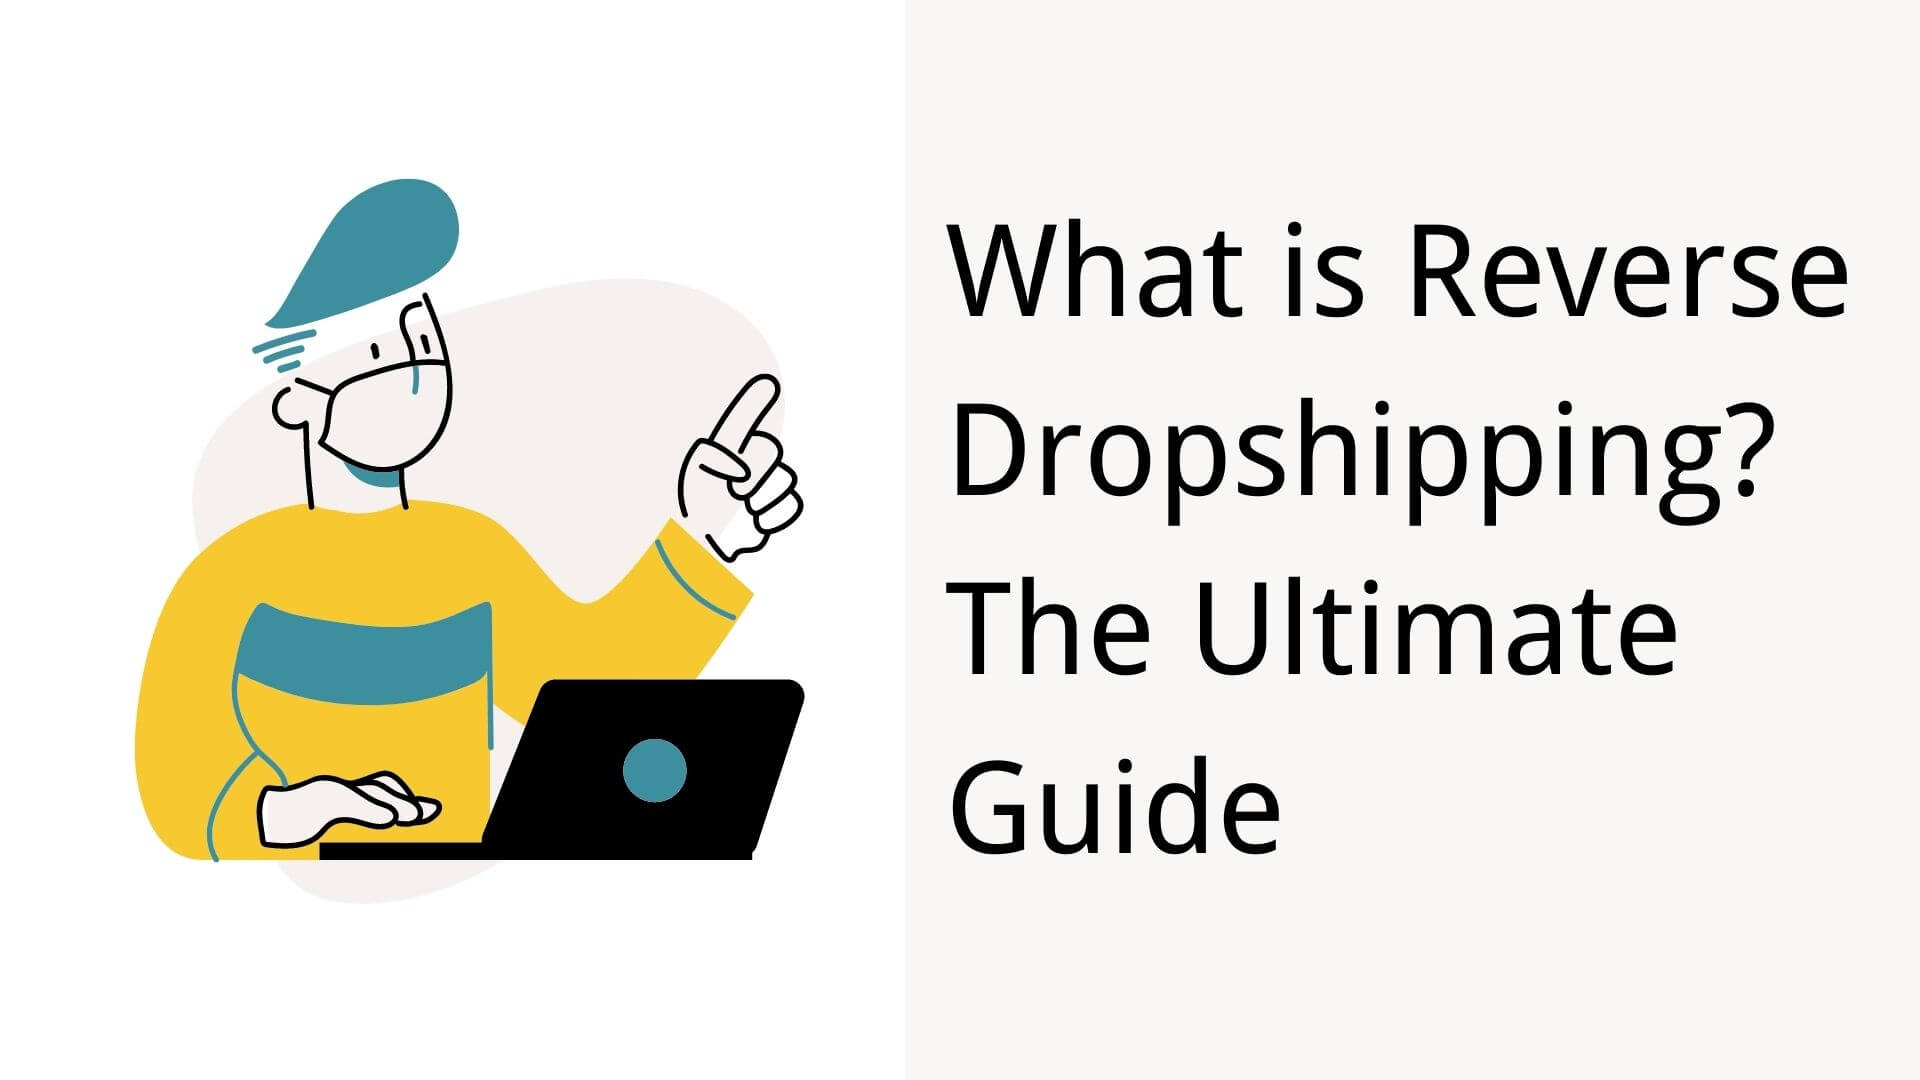 Dropshipping - The Ultimate Guide